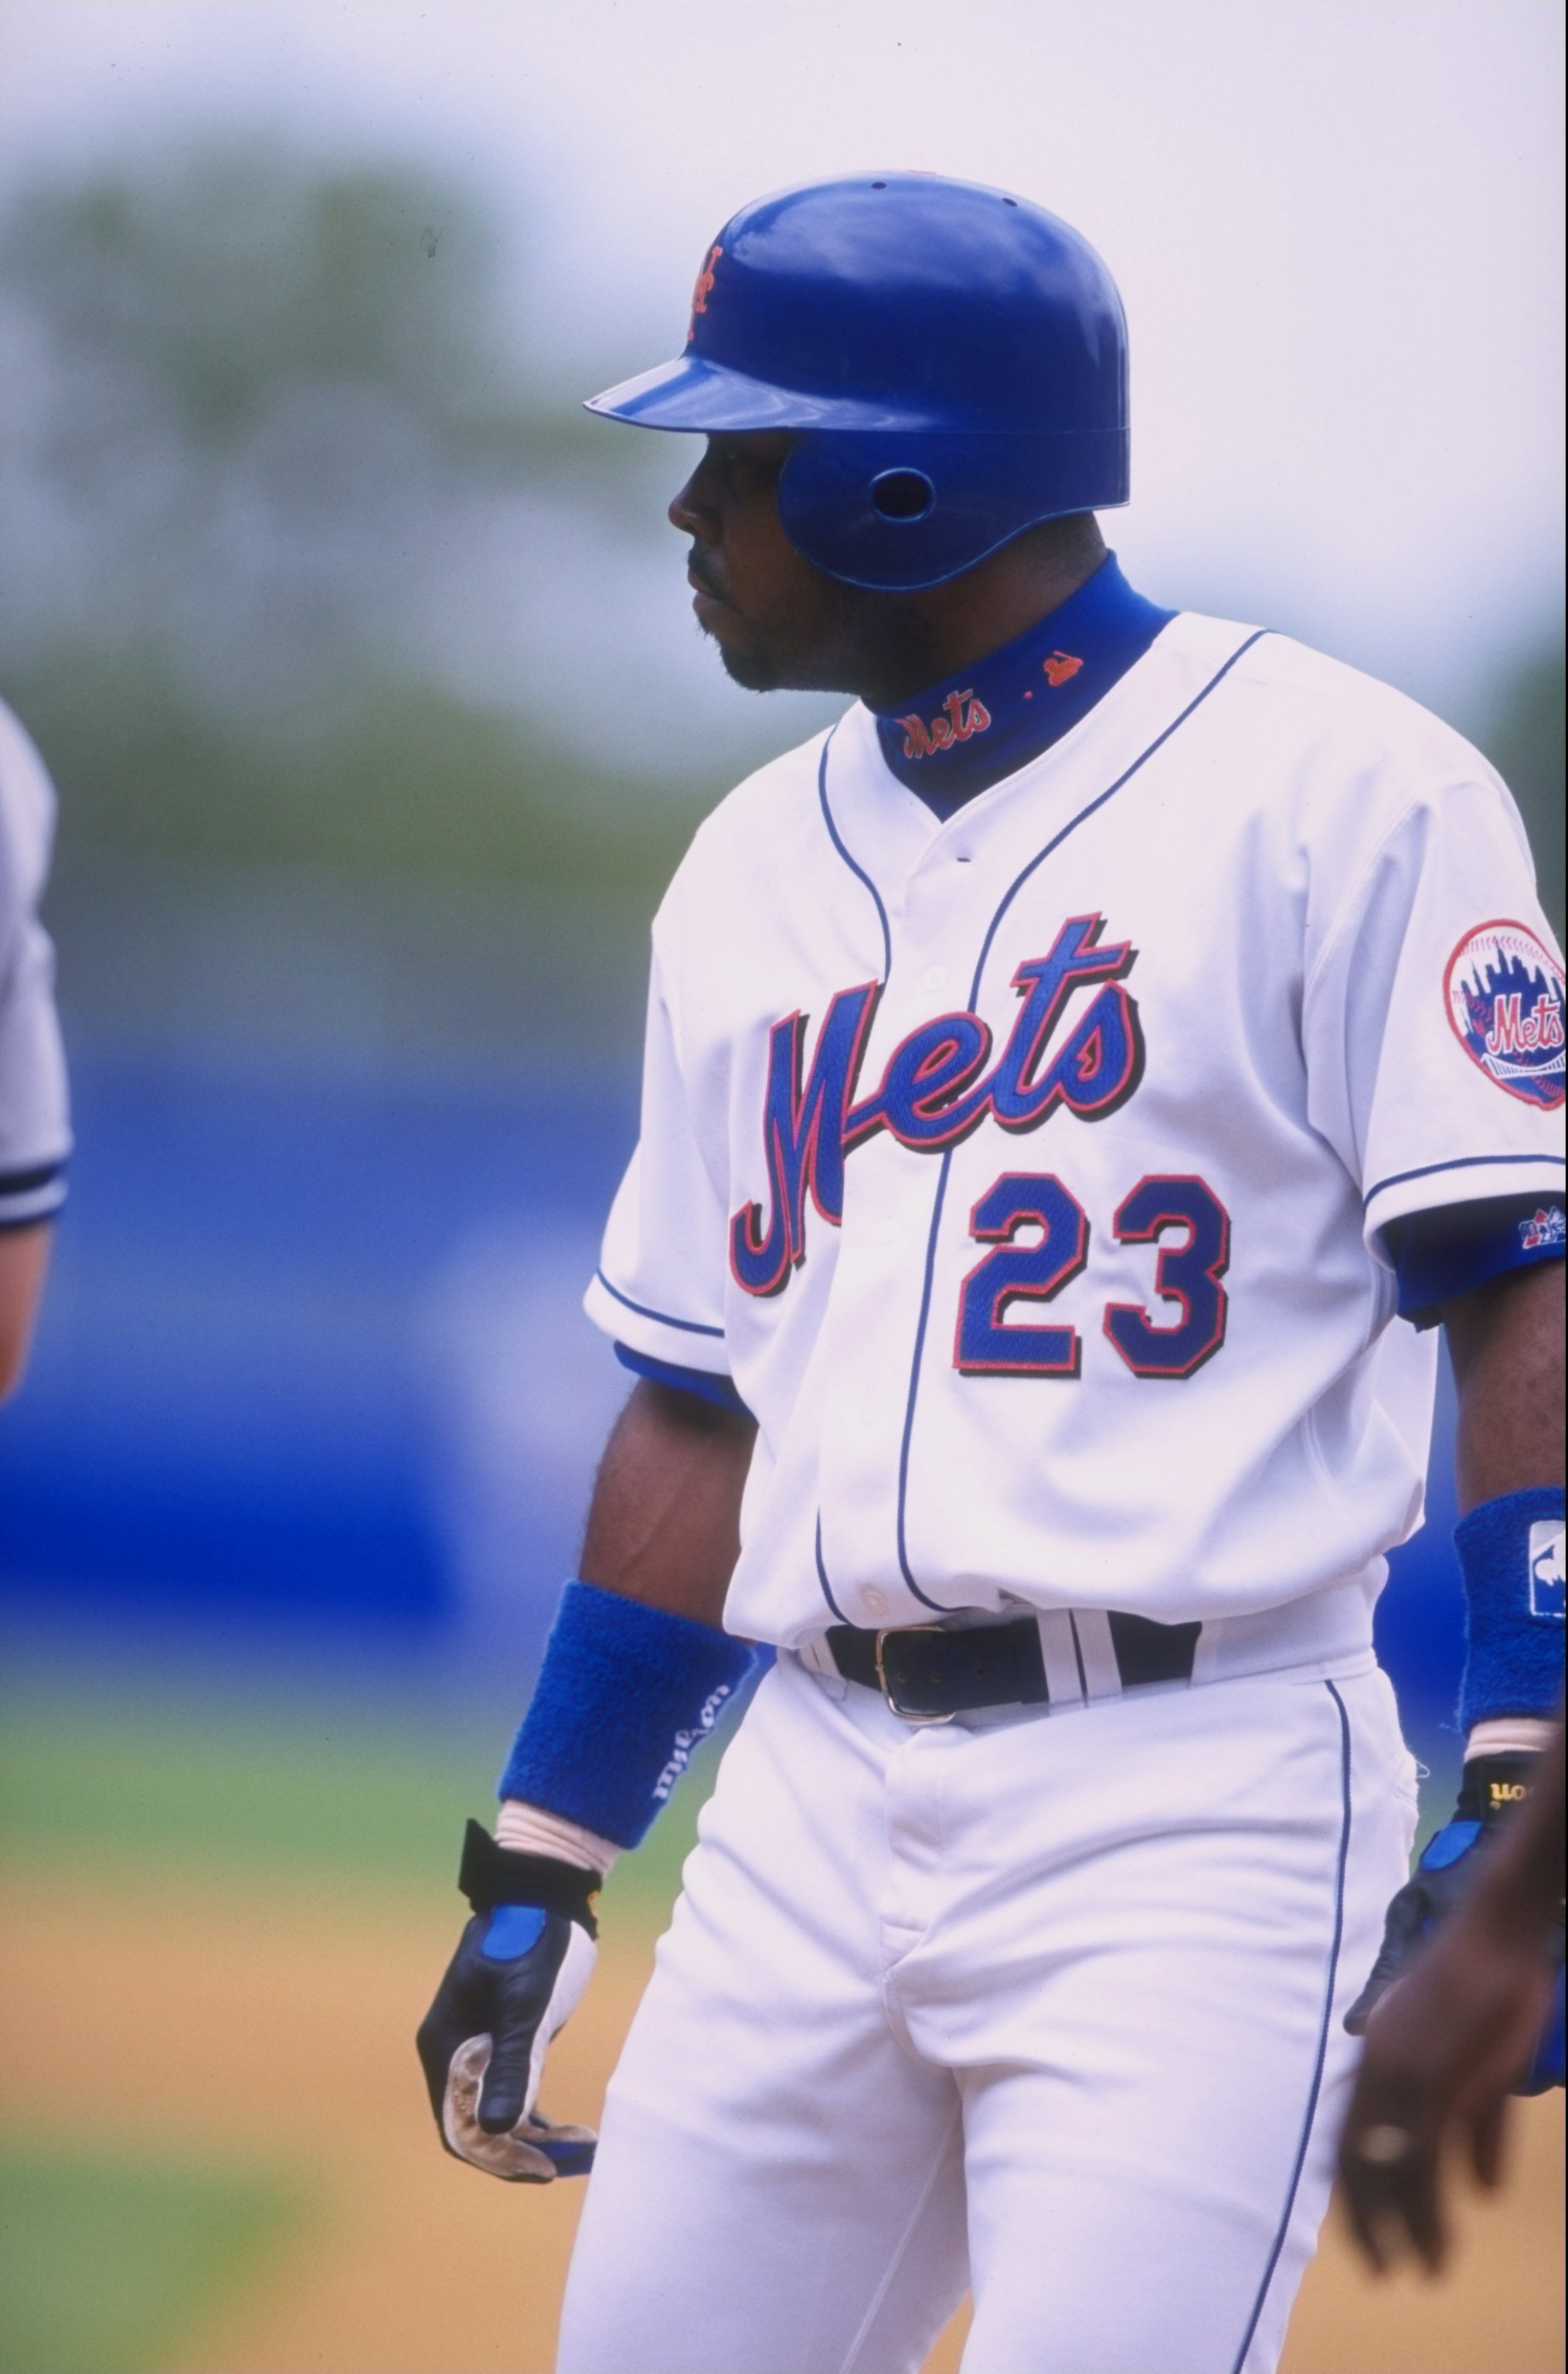 Remembering Mets History: (2003) Joe Reyes Is Youngest Player To